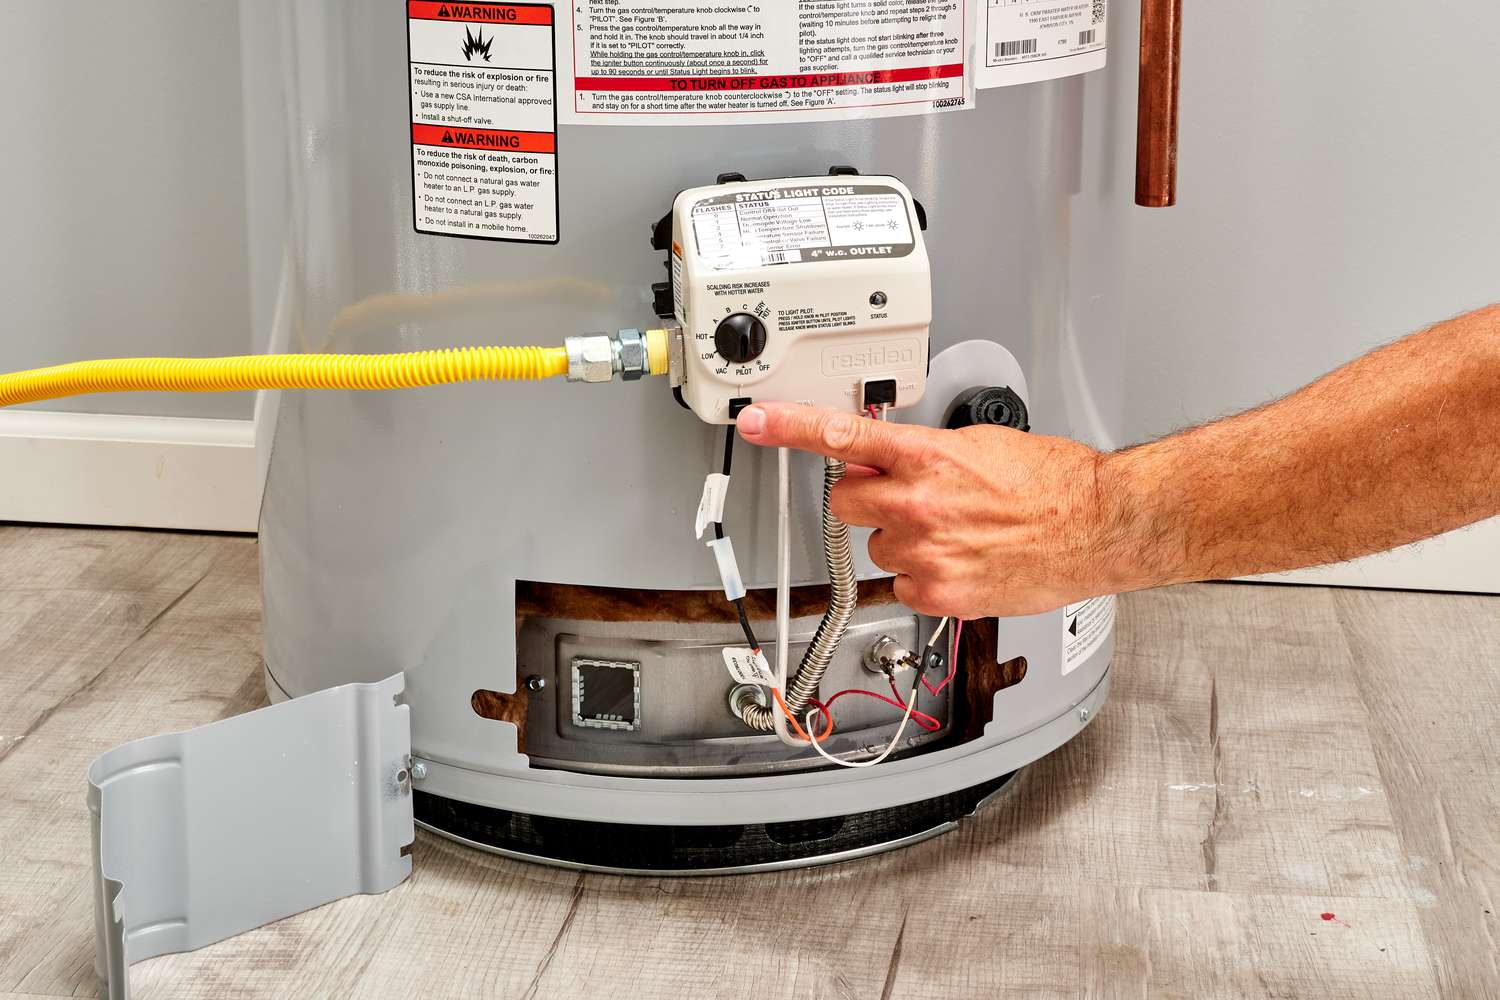 The Surprising Reason Your Electric Water Heater Keeps Shutting Off - And How To Fix It!